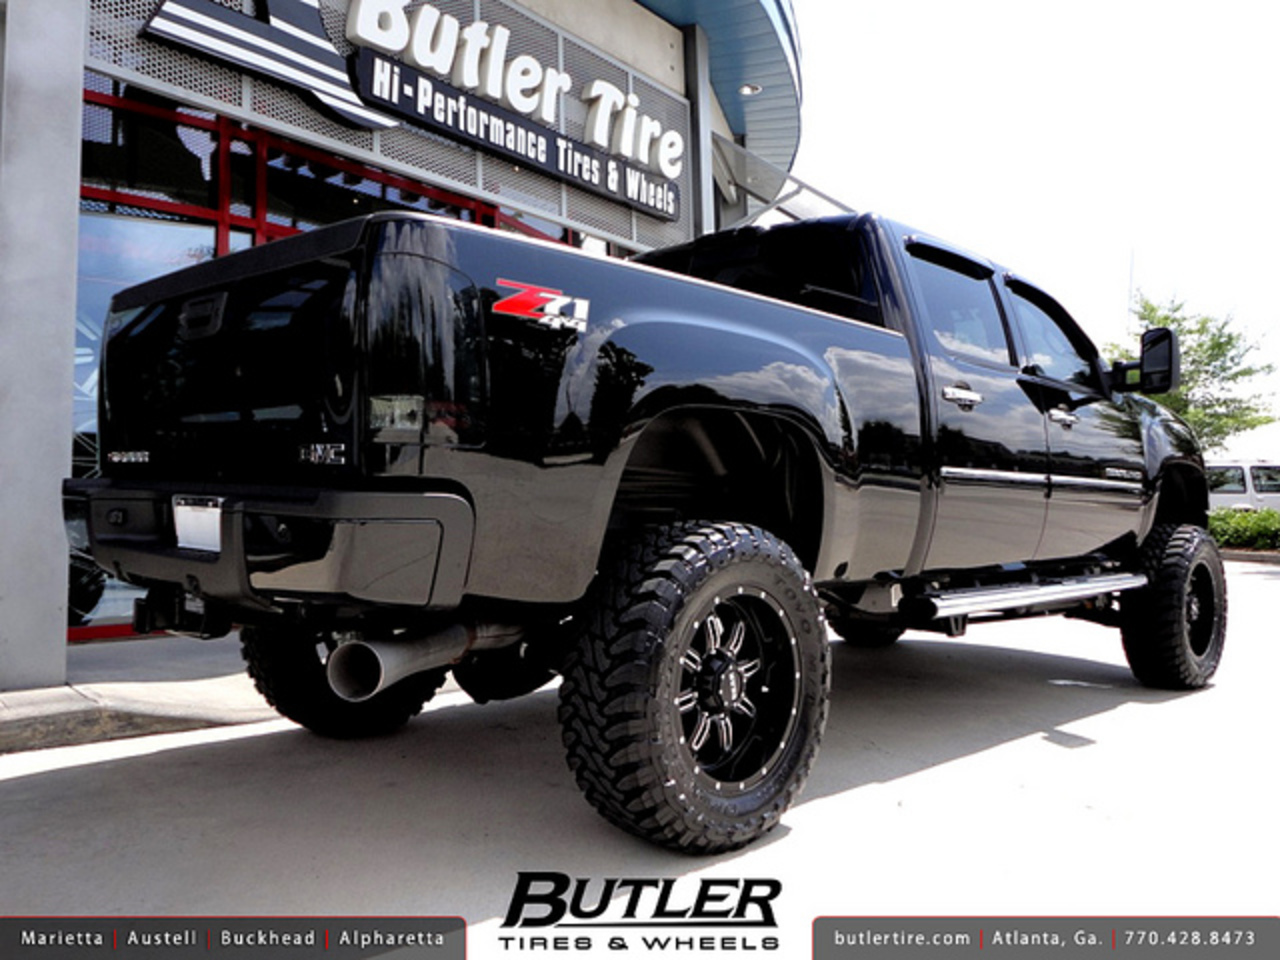 GMC Denali 2500 HD with 20in Gear 725 Wheels and 6in Pro Comp Lift ...